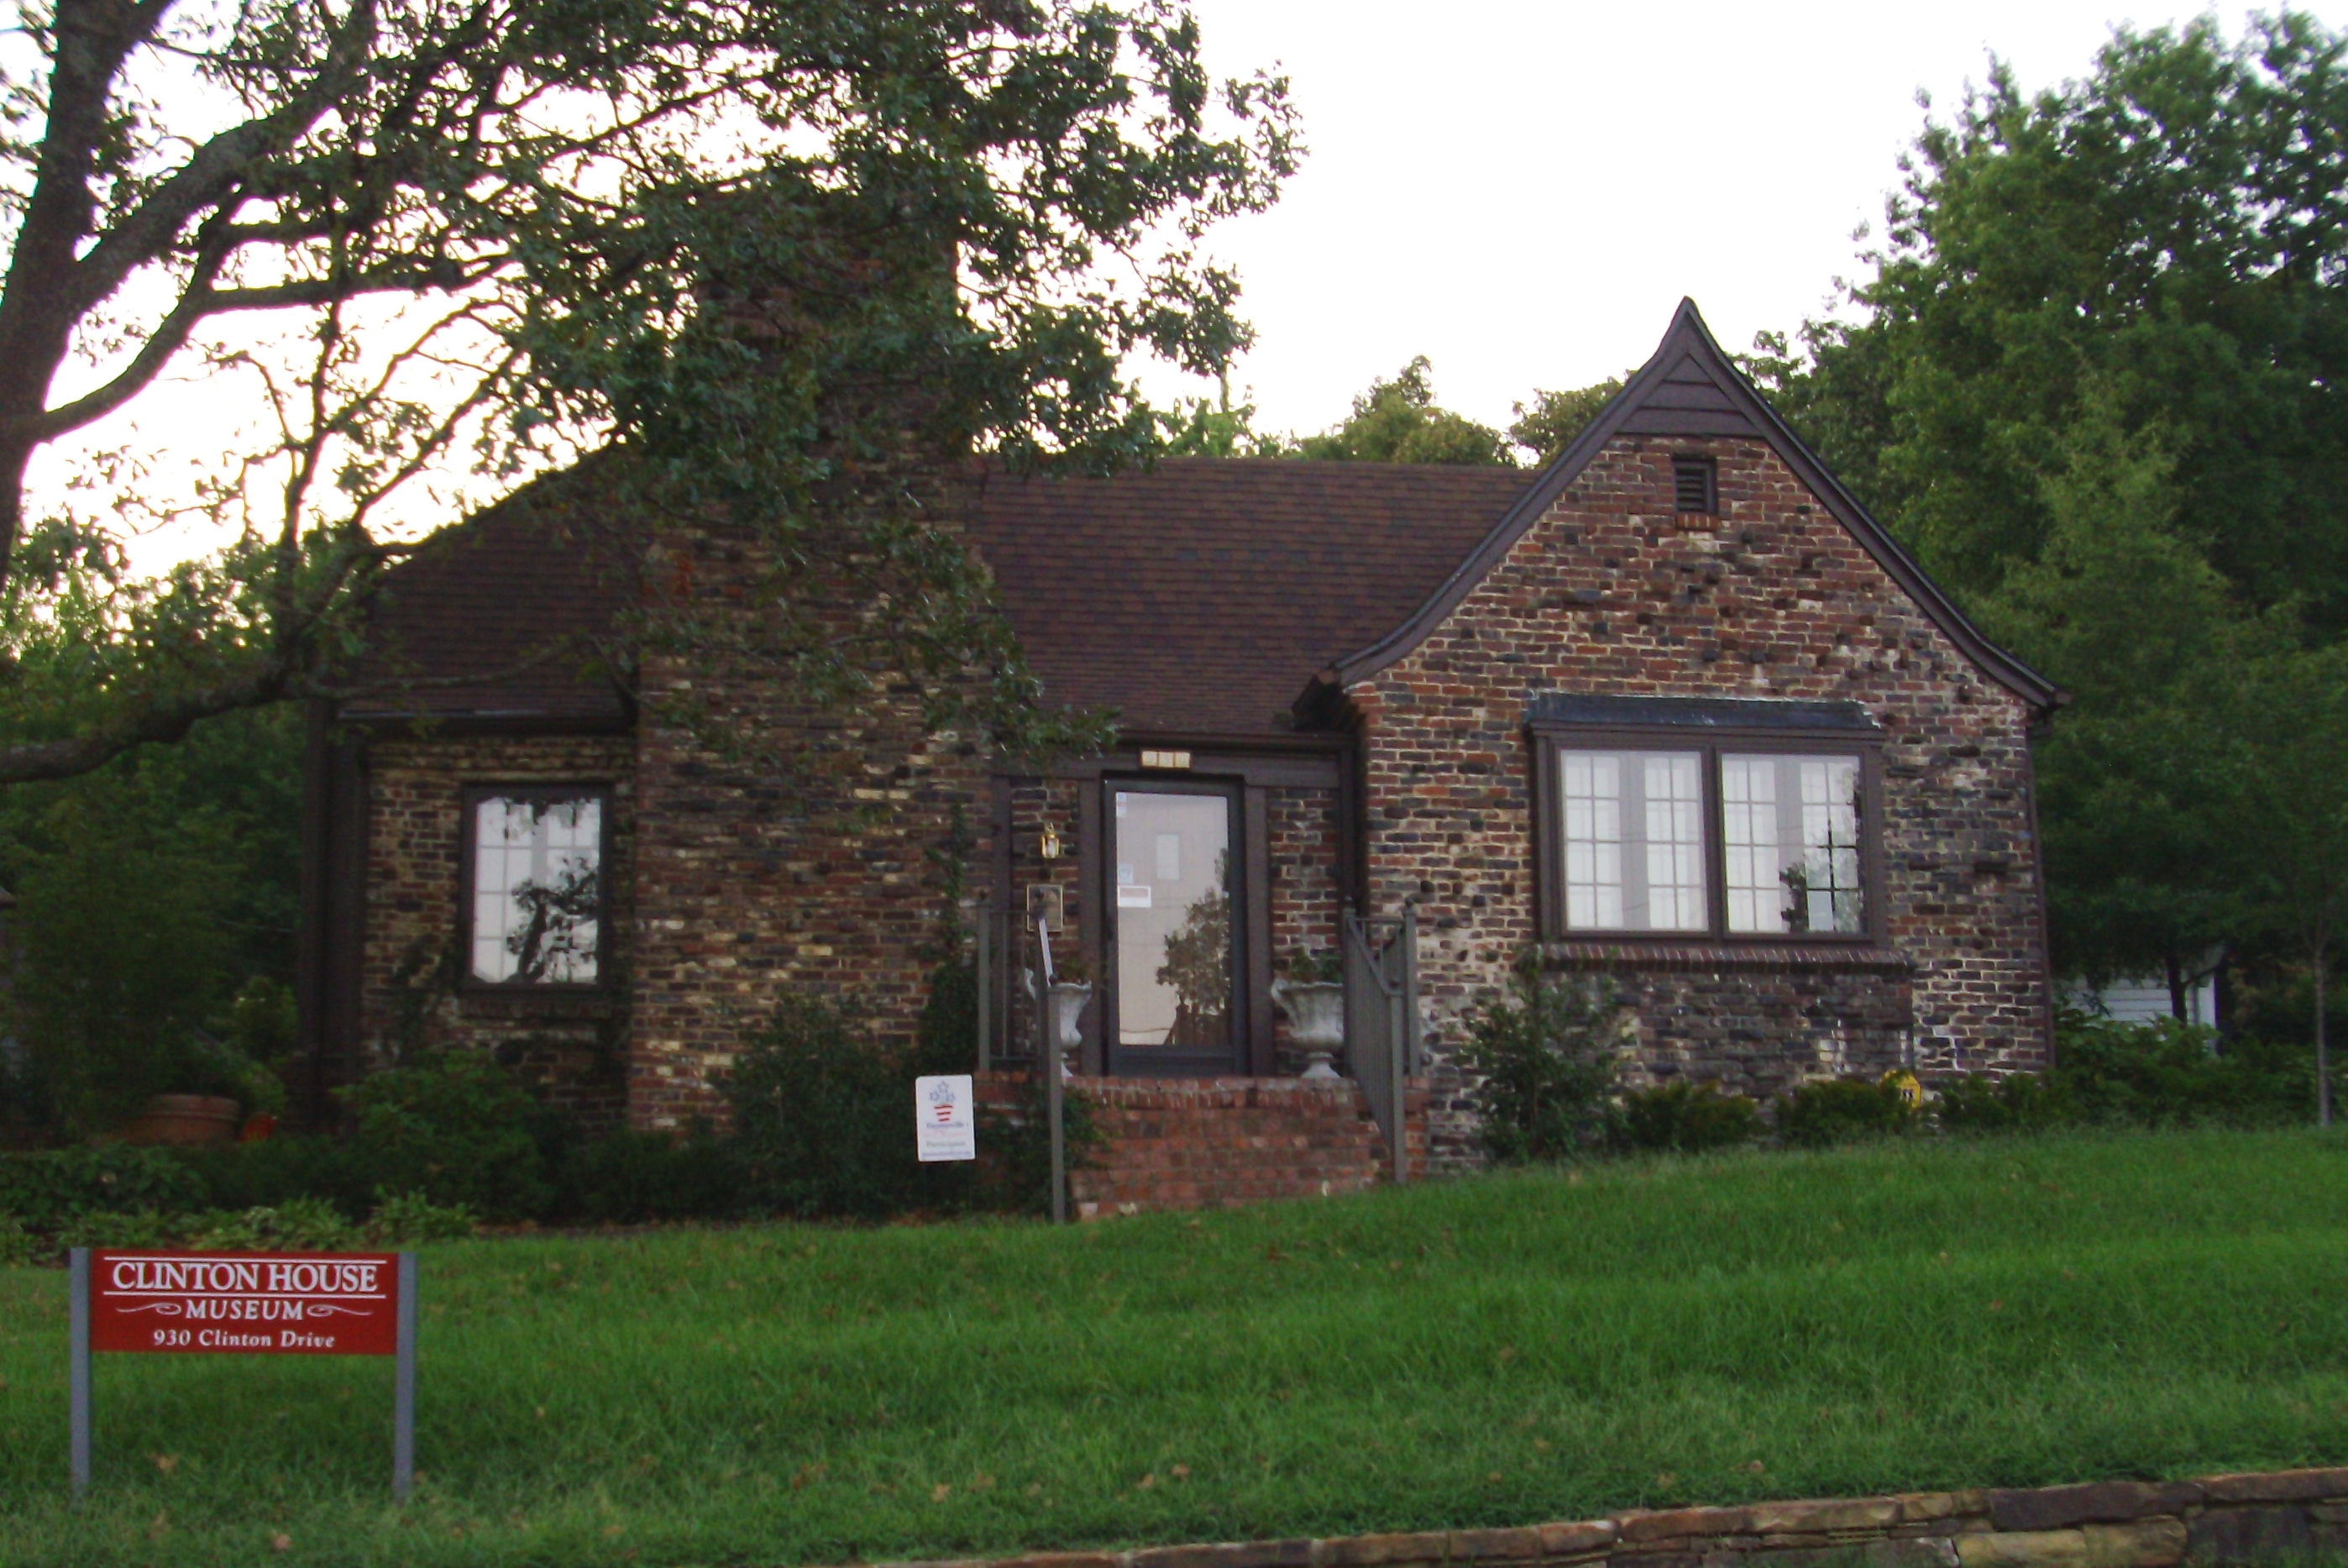 The Clinton home in Fayetteville, now a museum. (Wikipedia)